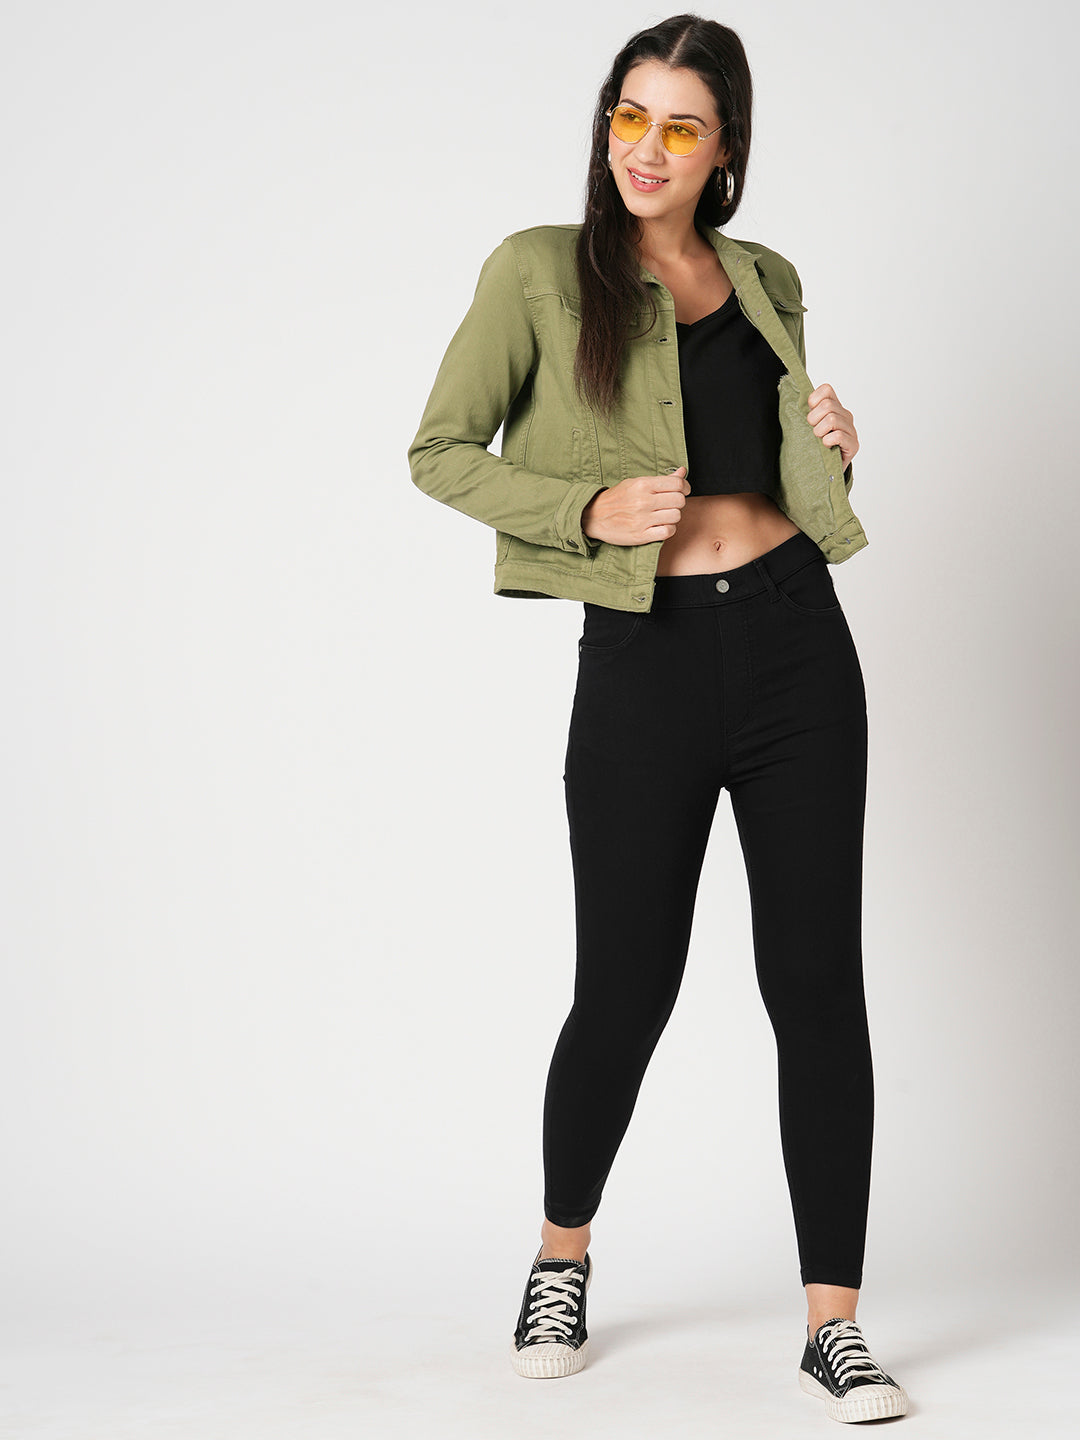 Women Slim Fit Olive Solid Jackets